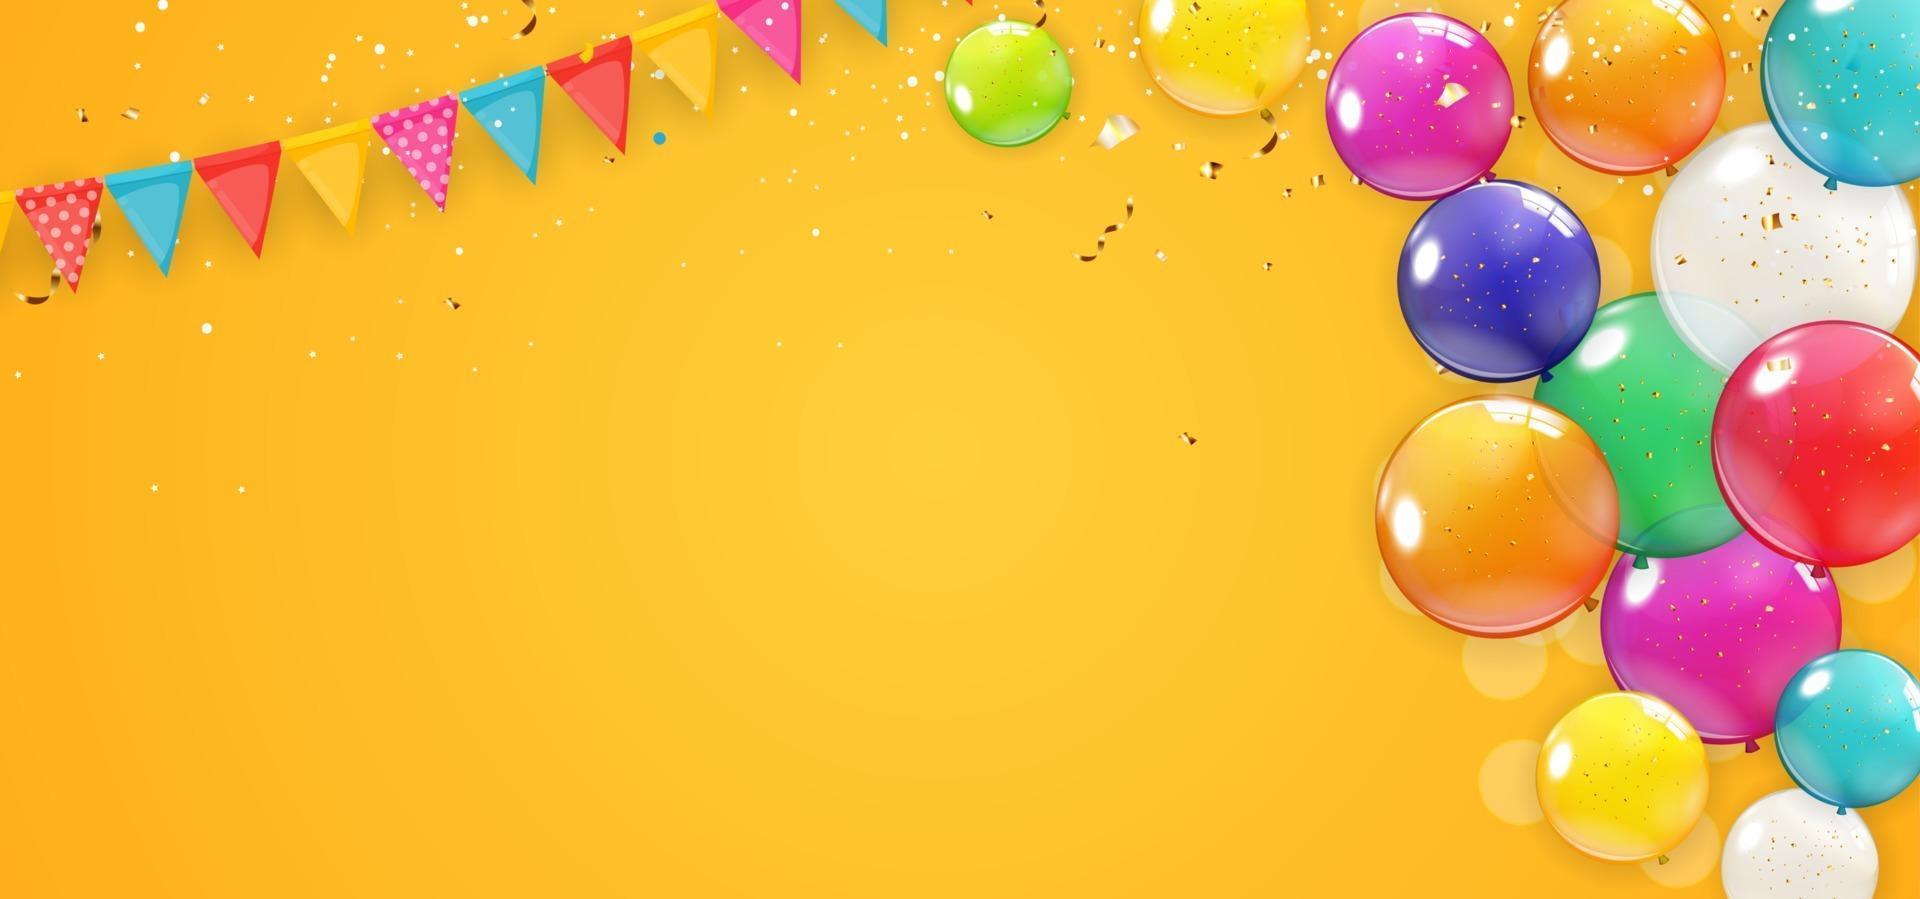 Holiday and Party banner with Balloons Background Design vector